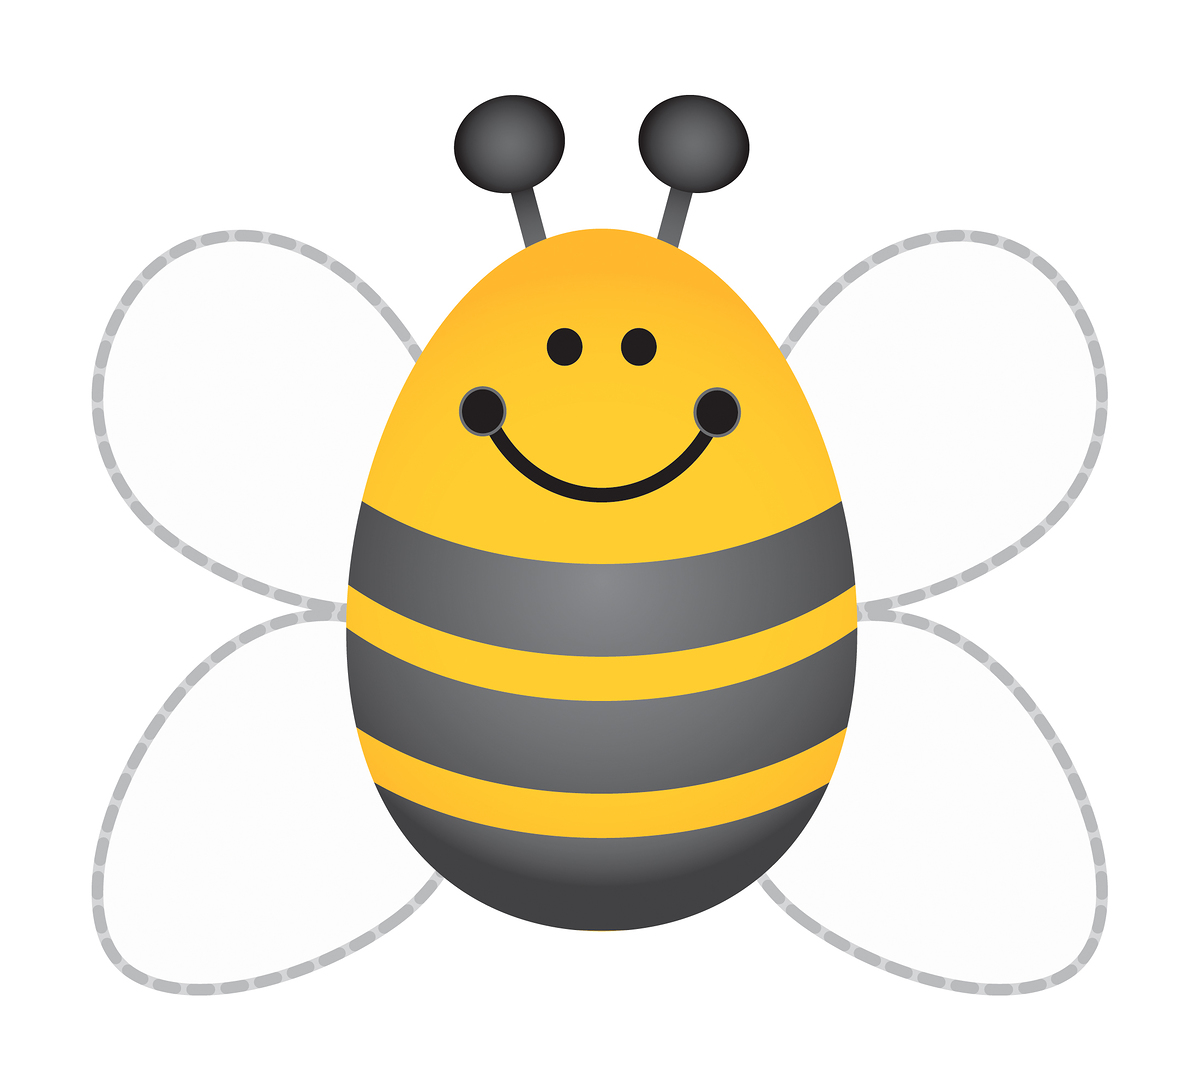 Bumble Bee Images Free Cliparts co